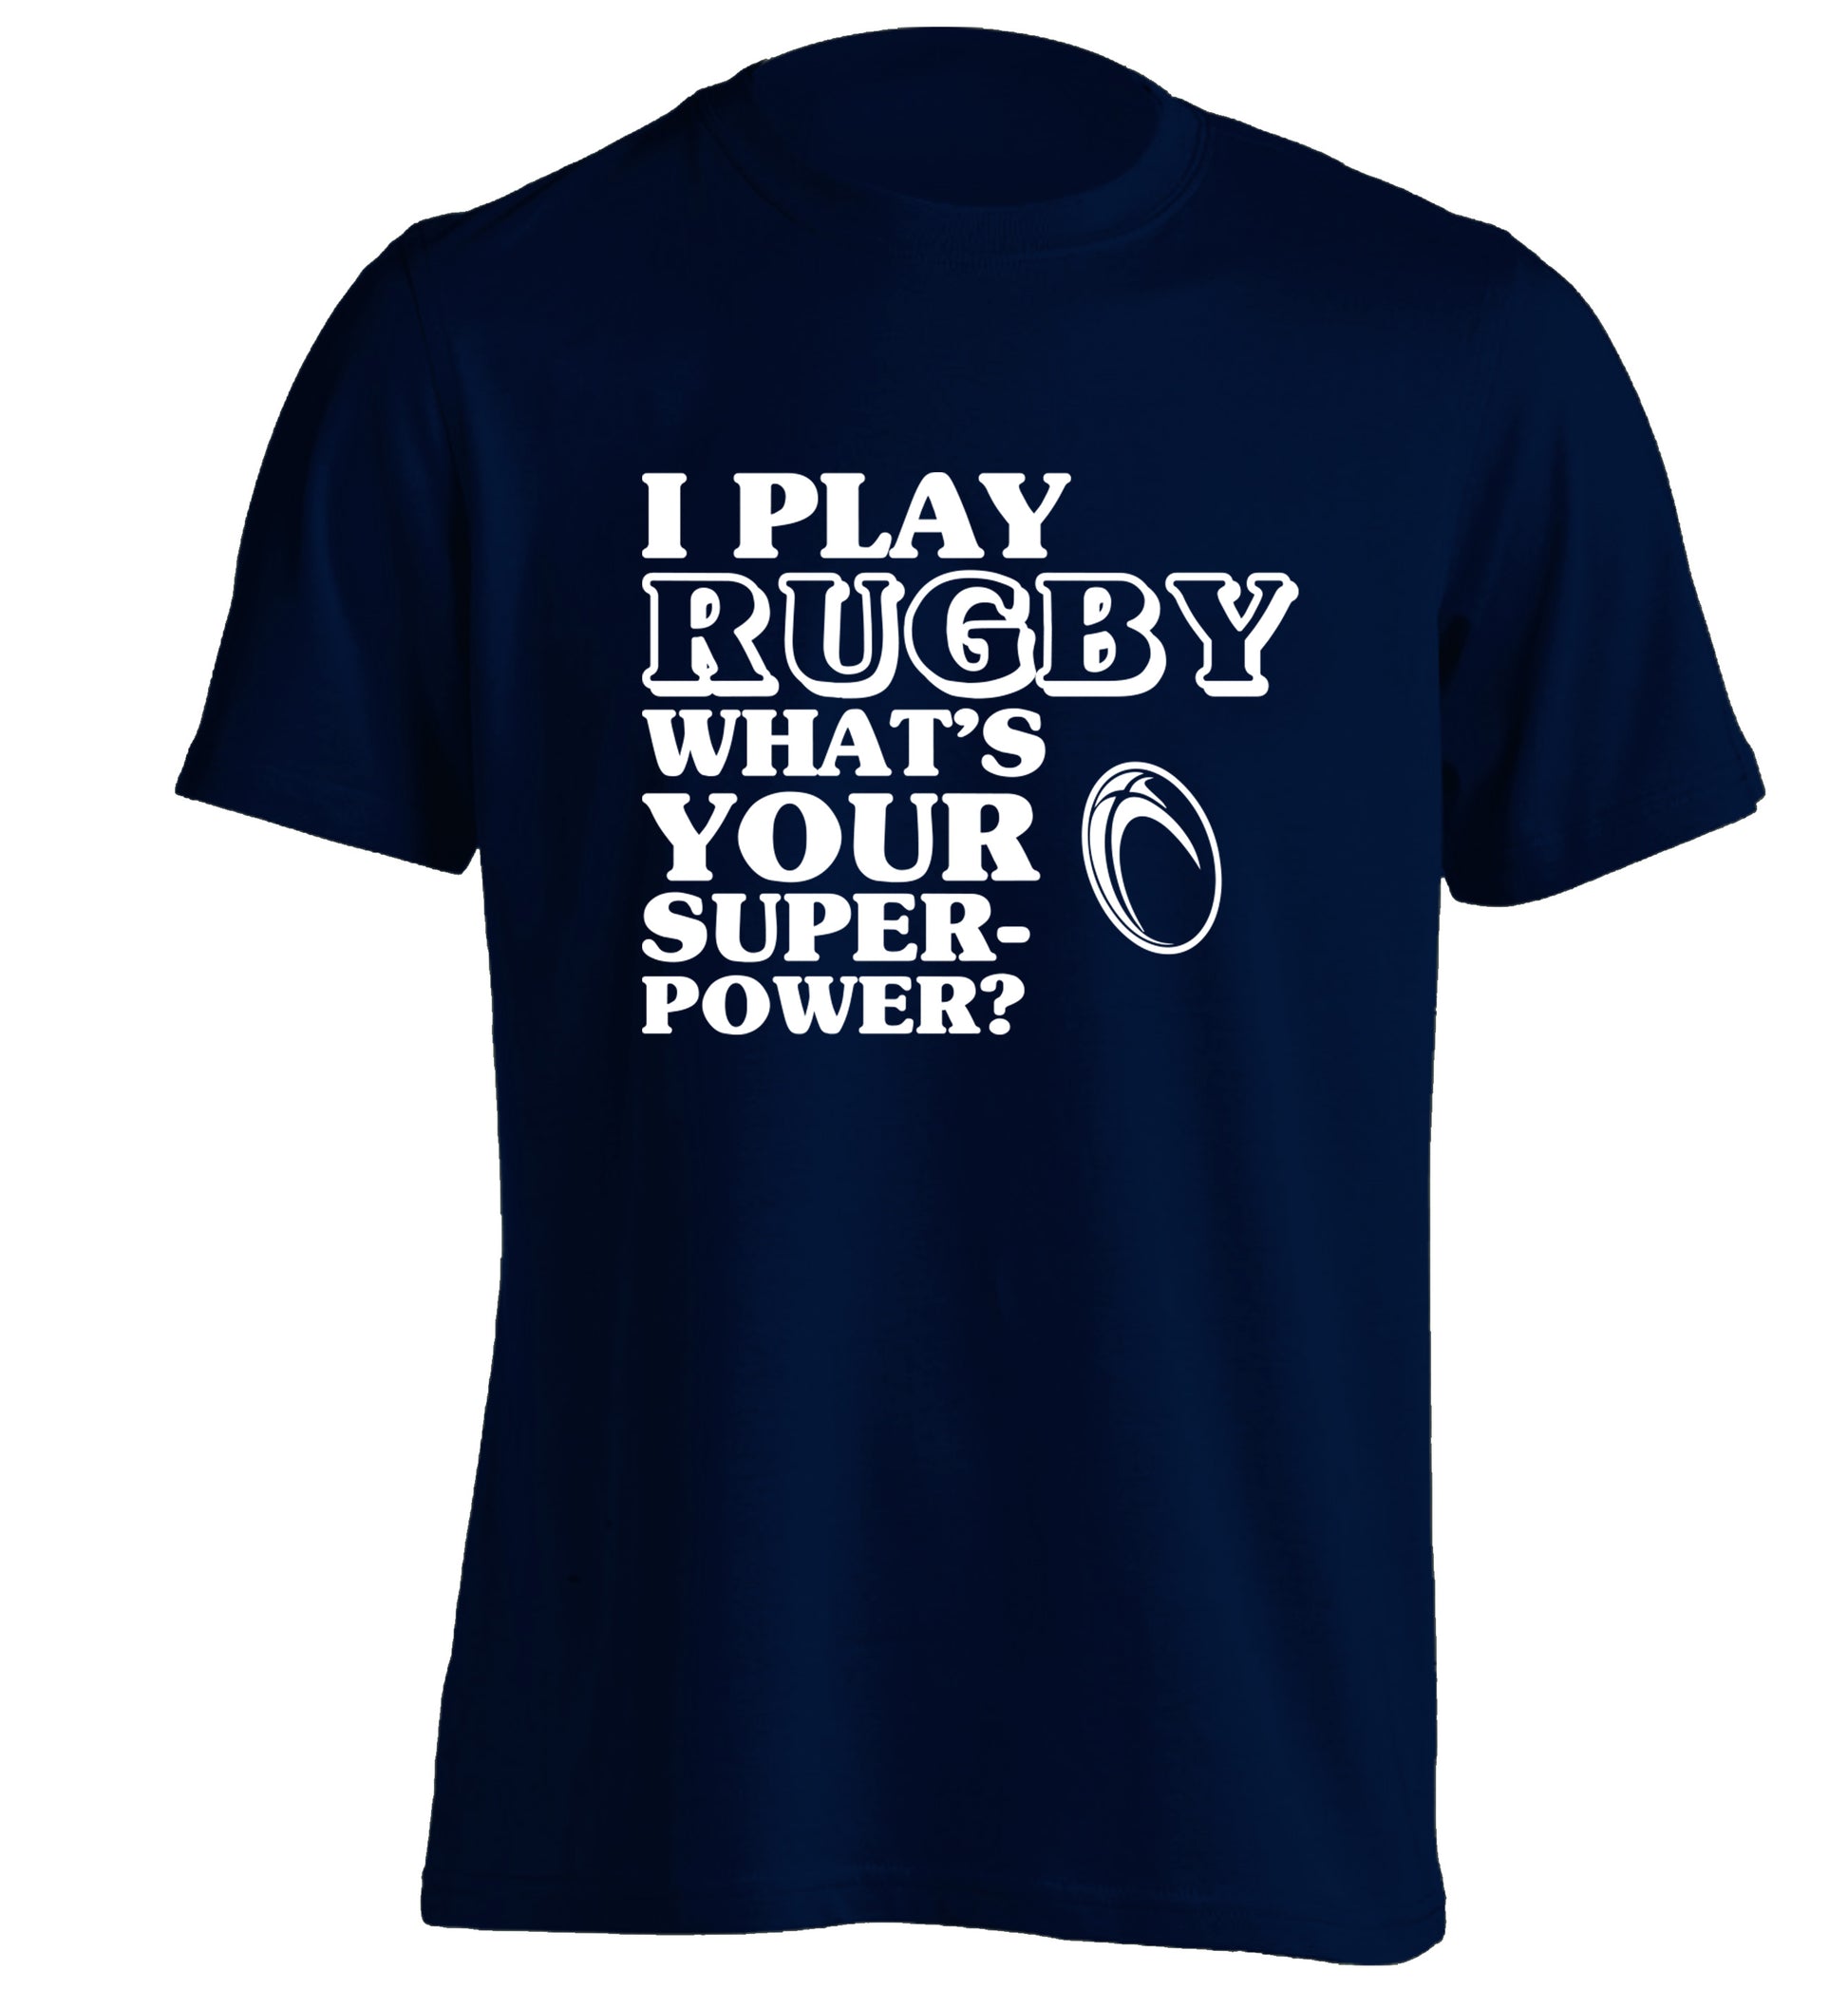 I play rugby what's your superpower? adults unisex navy Tshirt 2XL